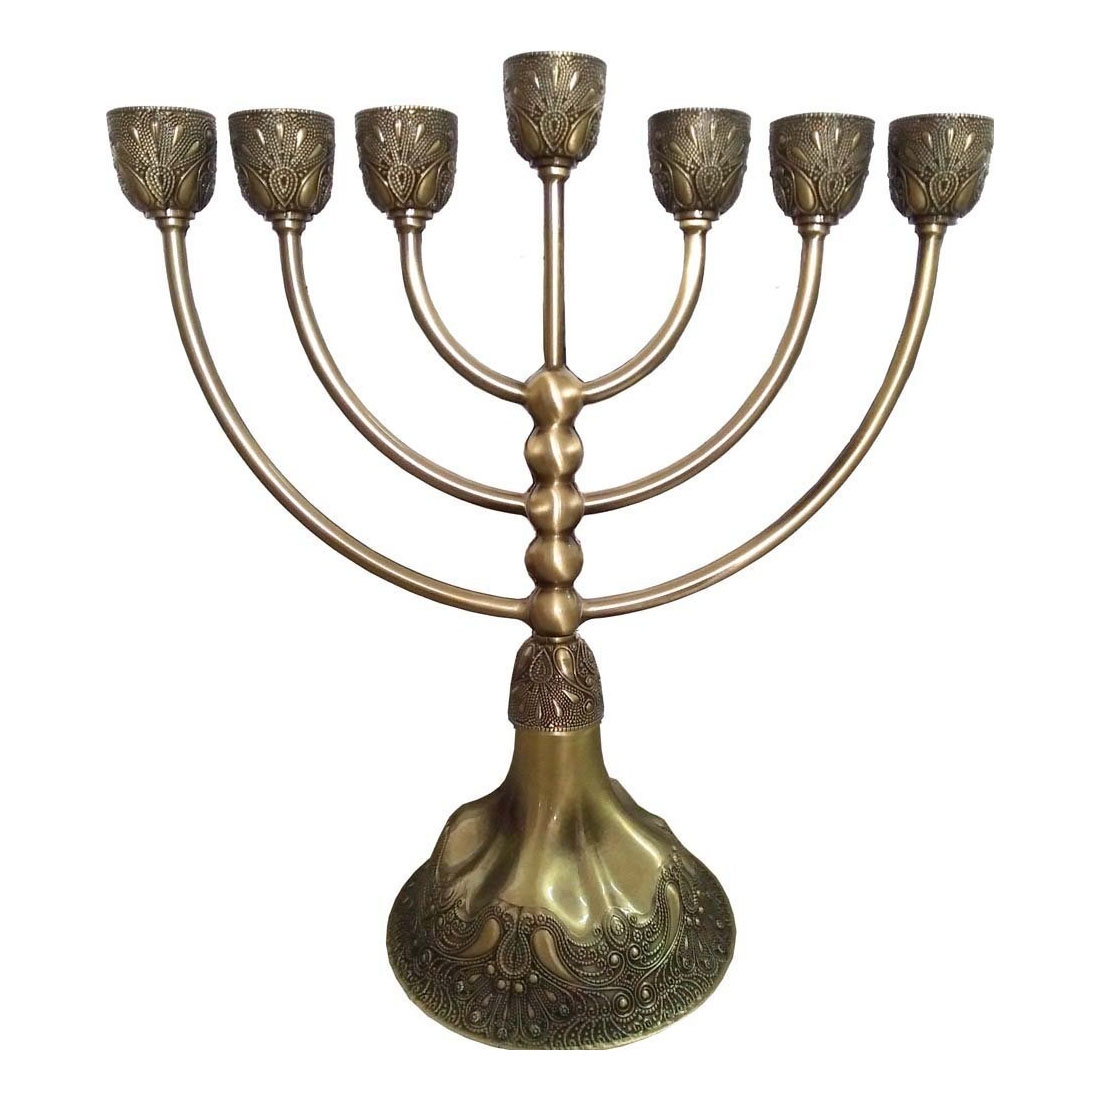 Brass-Plated Traditional Ornate 7-Branched Menorah - 1